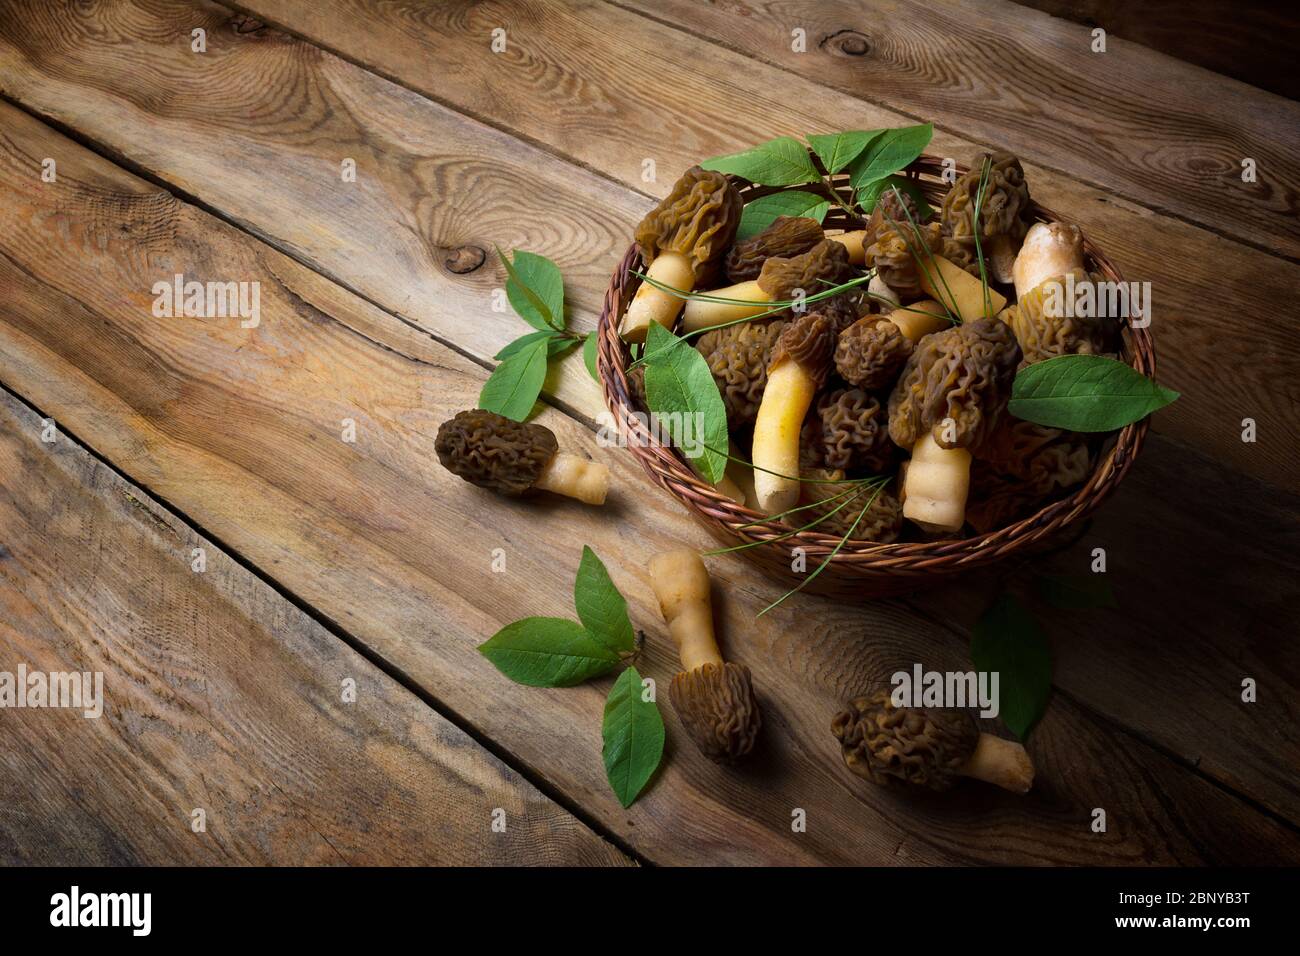 Wicker basket with wild forest picking morel mushrooms and green leaves on the rustic wooden background. Vegetarian healthy food concept Stock Photo